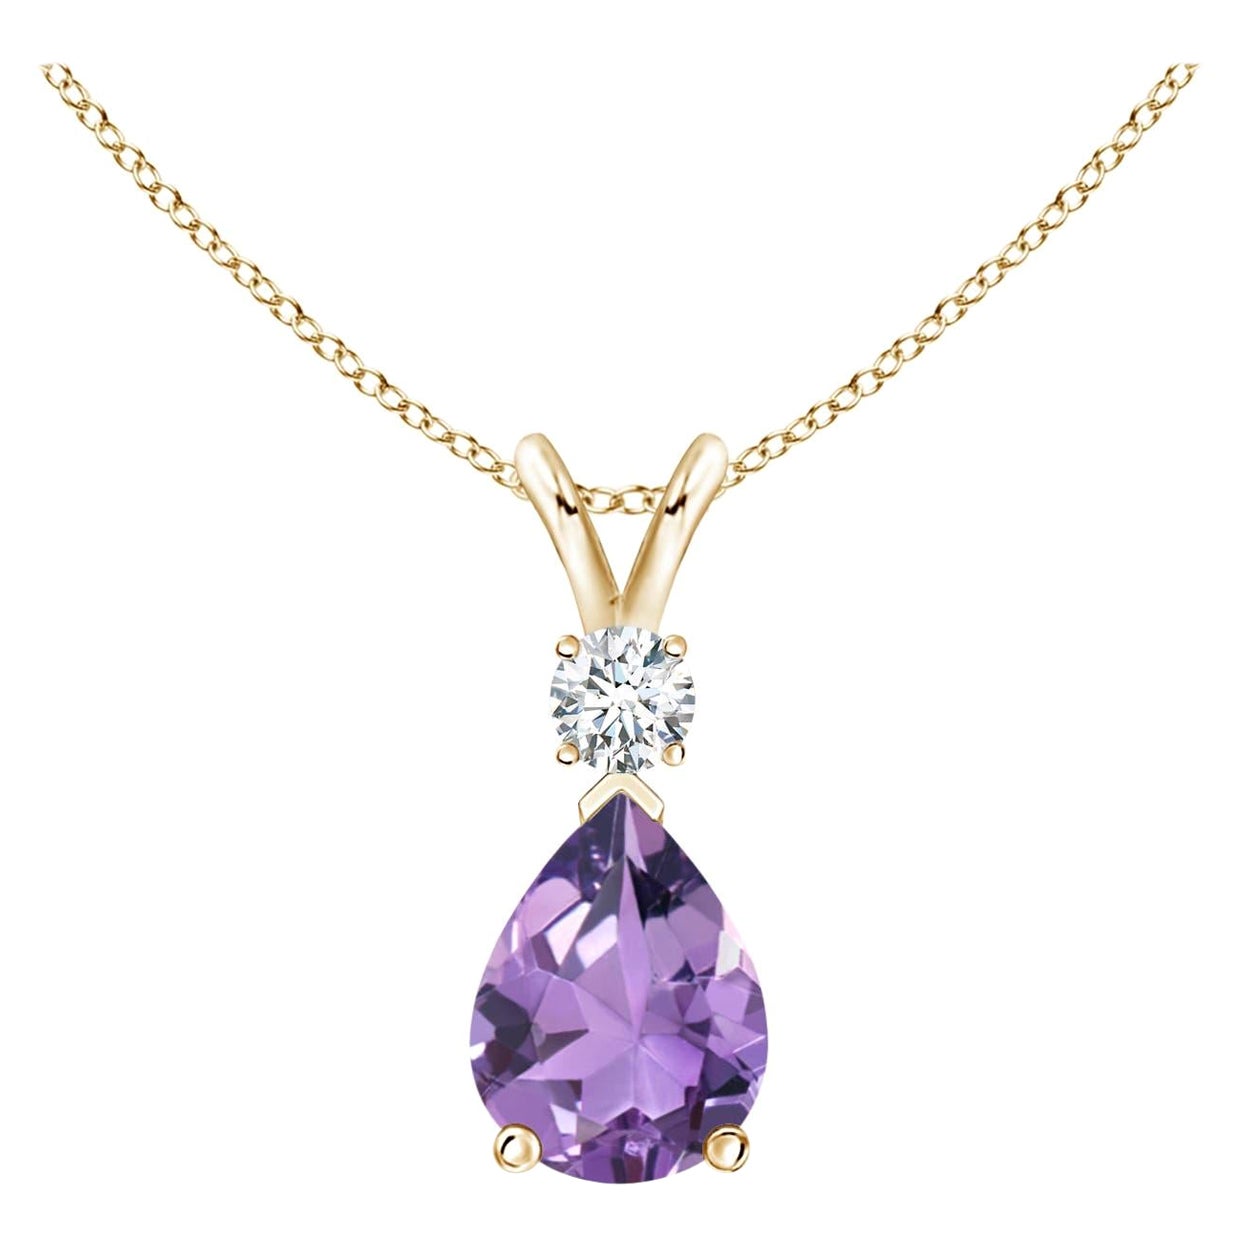 Natural 1 ct Amethyst Teardrop Pendant with Diamond in 14K Yellow Gold